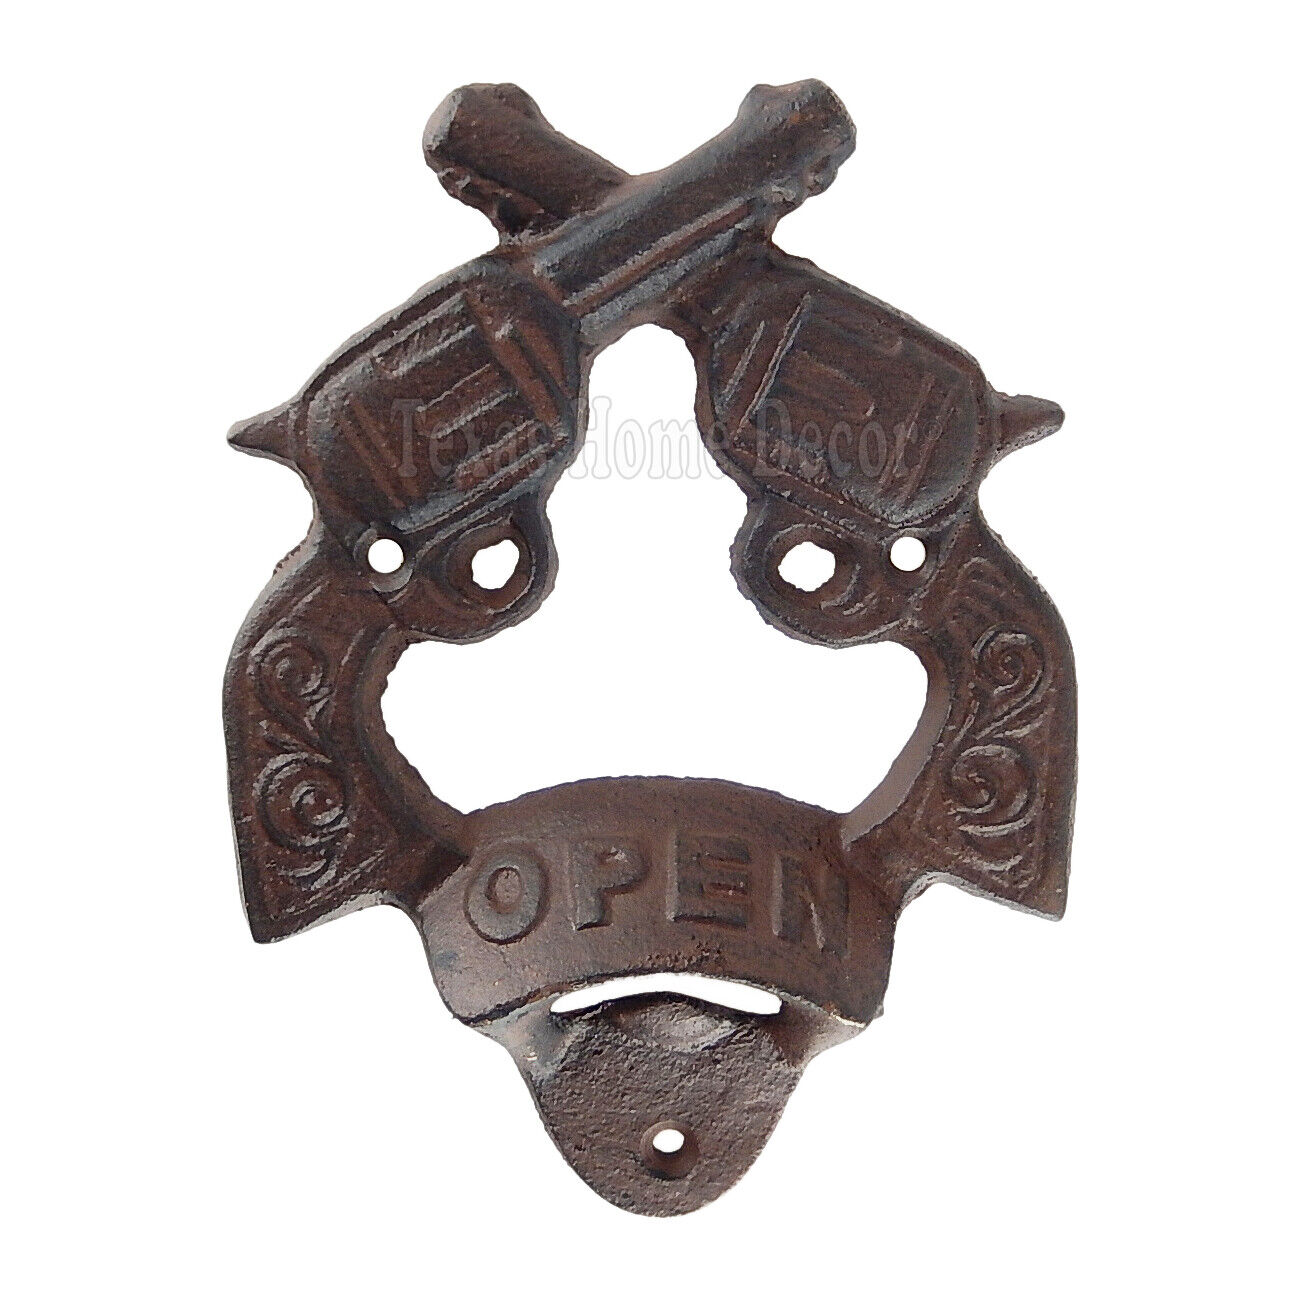 Crossed Guns Bottle Opener Rustic Cast Iron Wall Mount Western Antique Style 